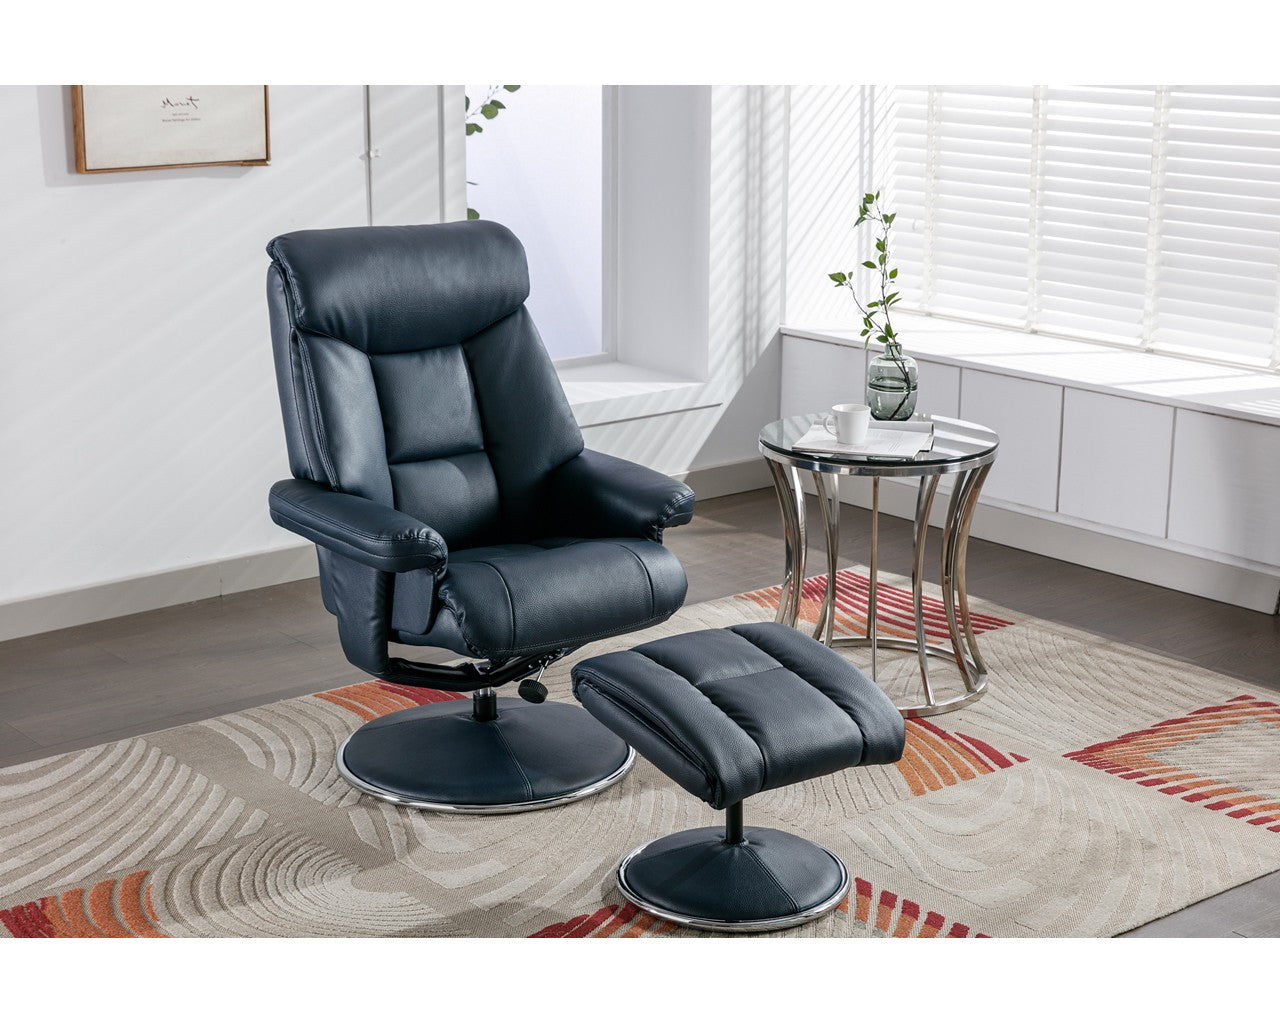 Swivel Recliner Chair Collection - Biarritz: Navy Plush